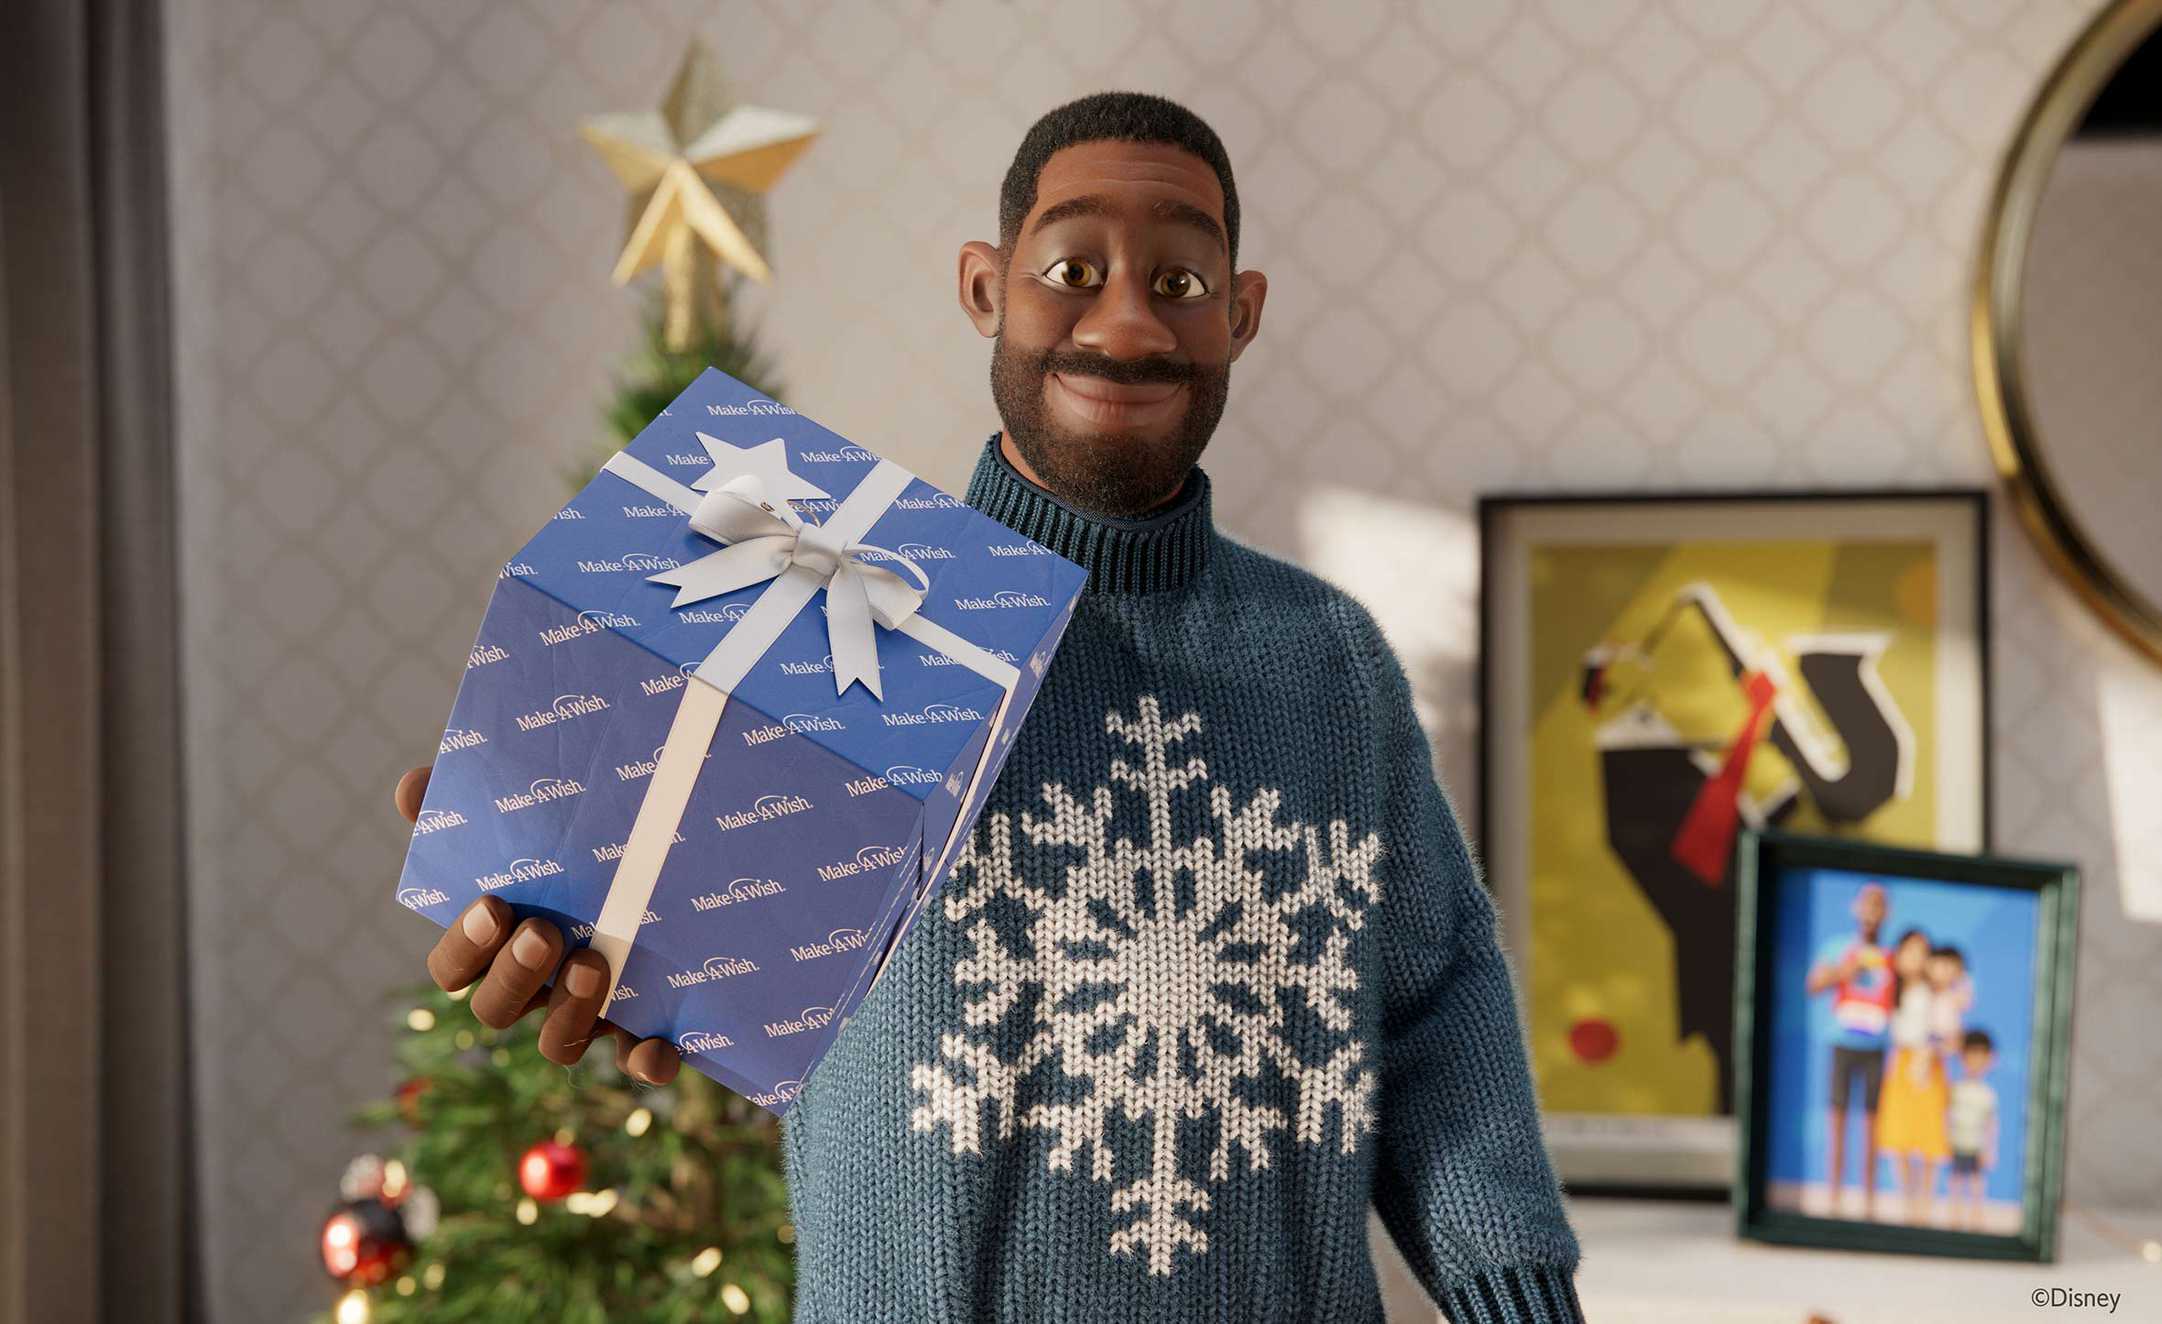 The stepdad from Disney's advert, holding up a Christmas present wrapped in blue paper.